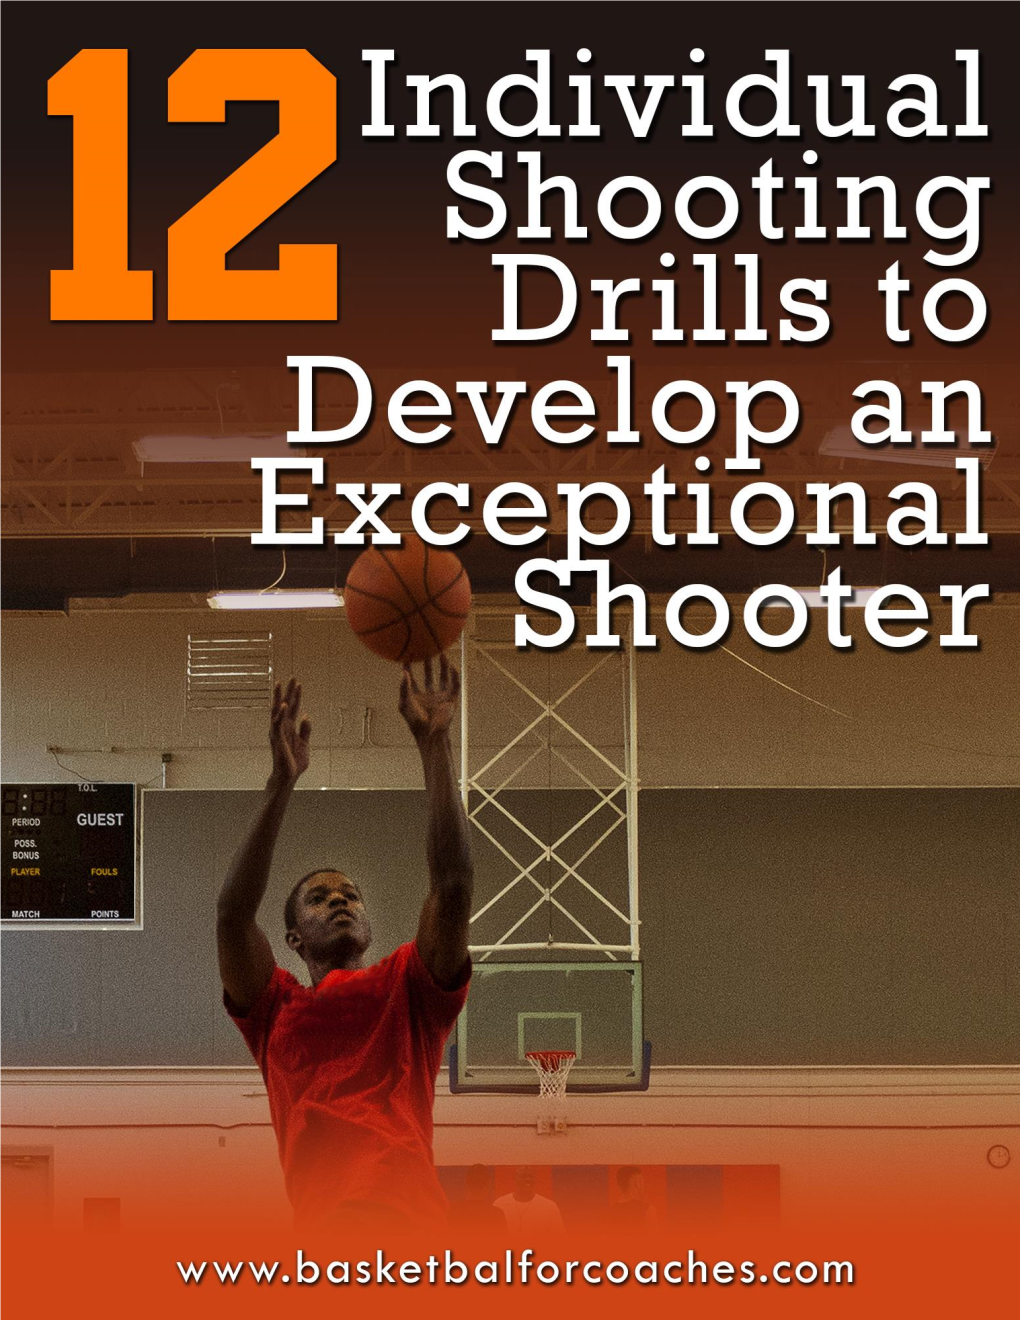 Shooting Drills to Develop an Exceptional Shooter